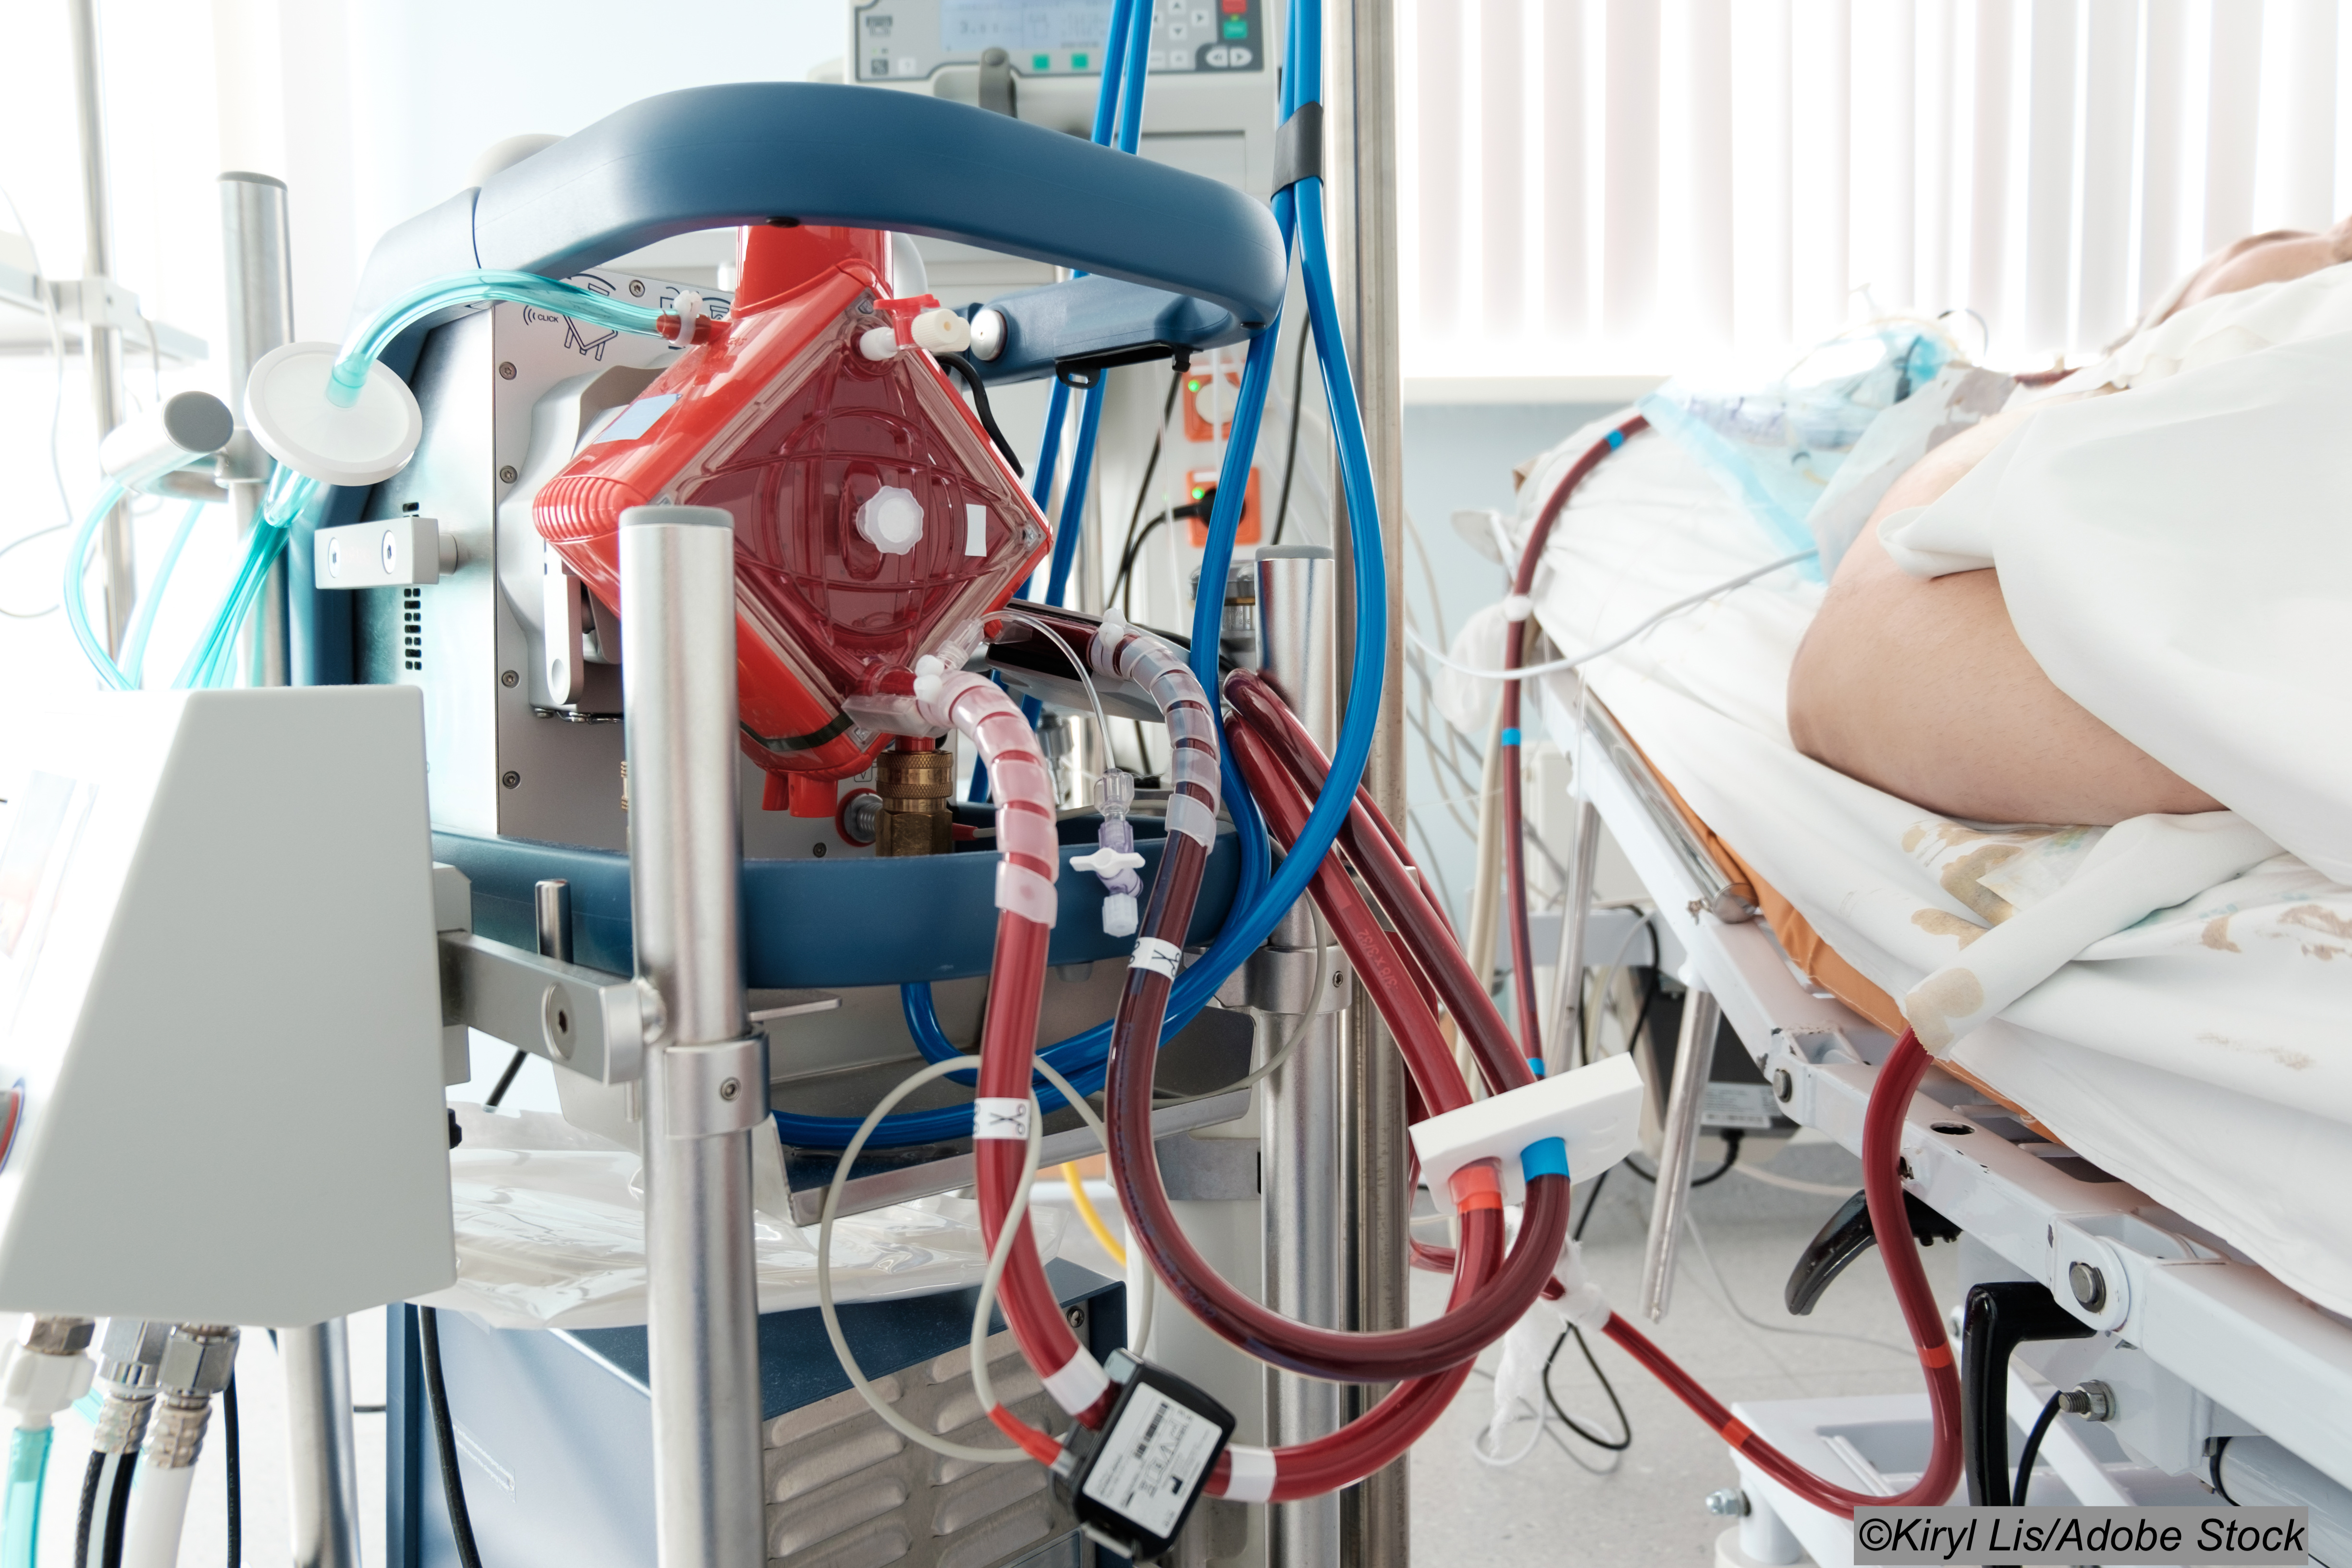 Covid-19: With ECMO, Experience Matters